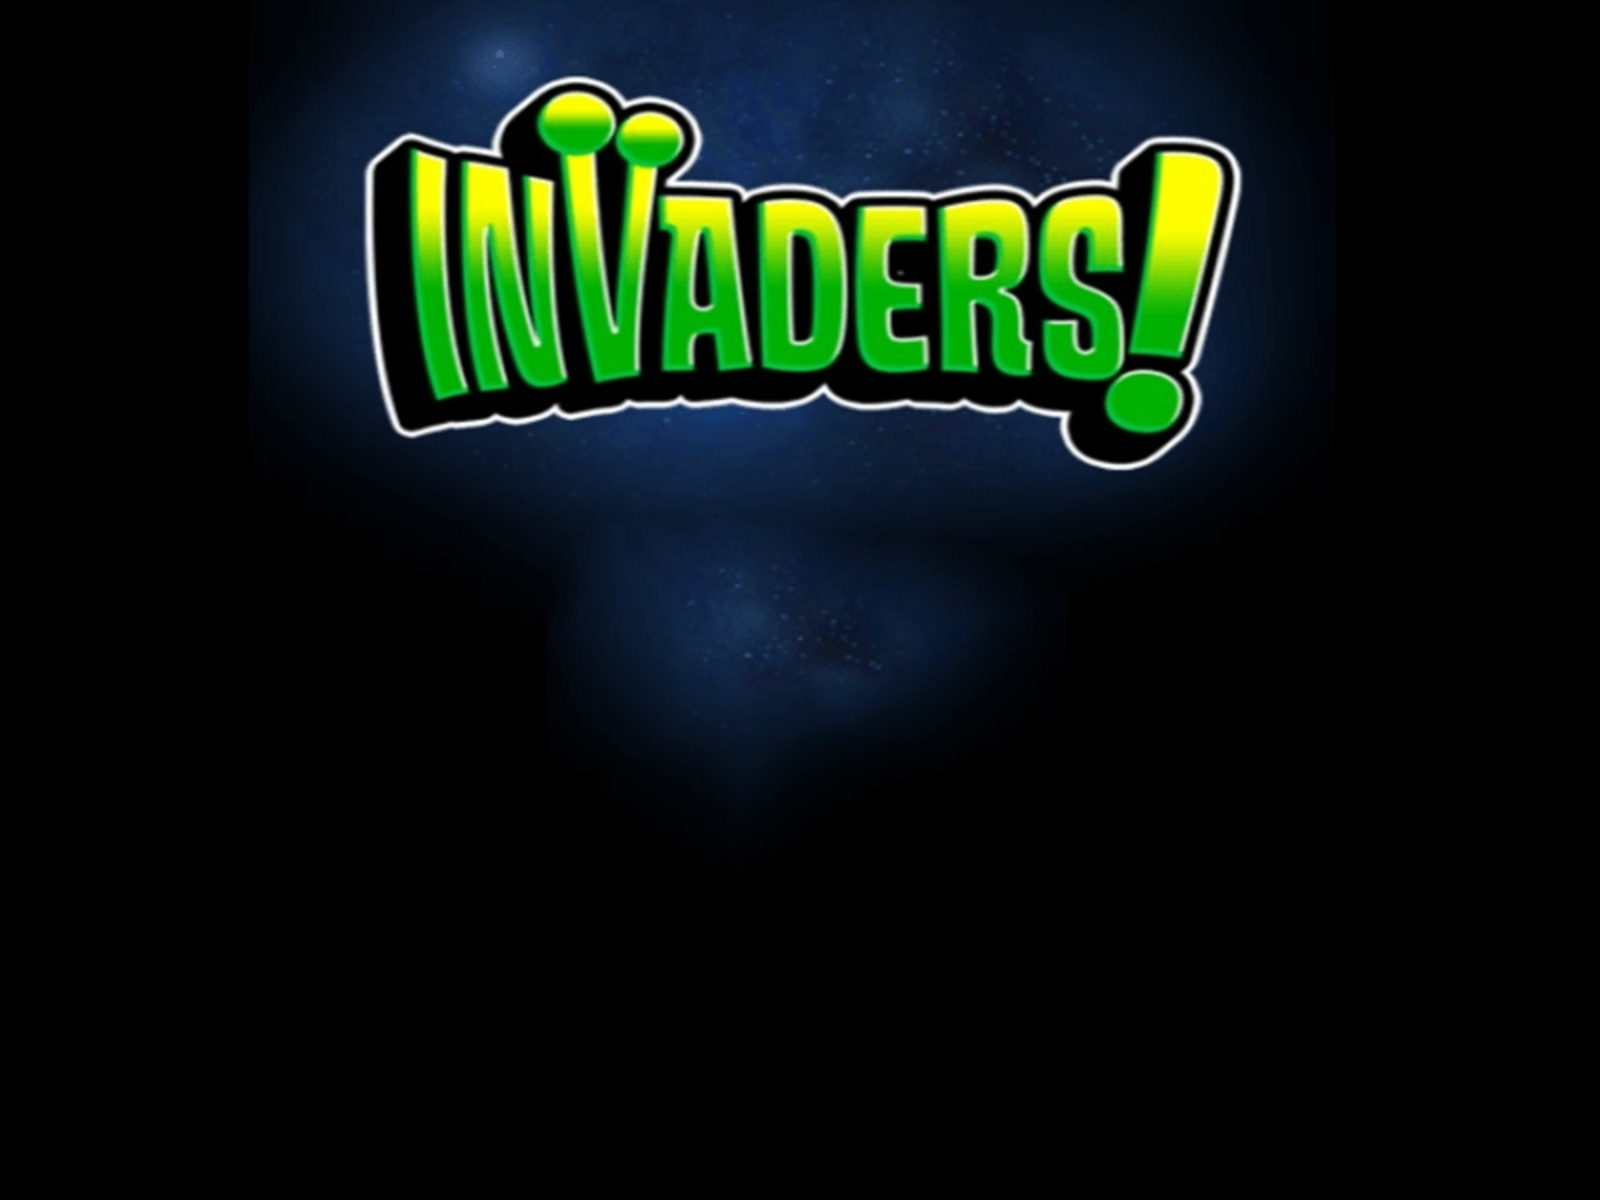 Invaders demo